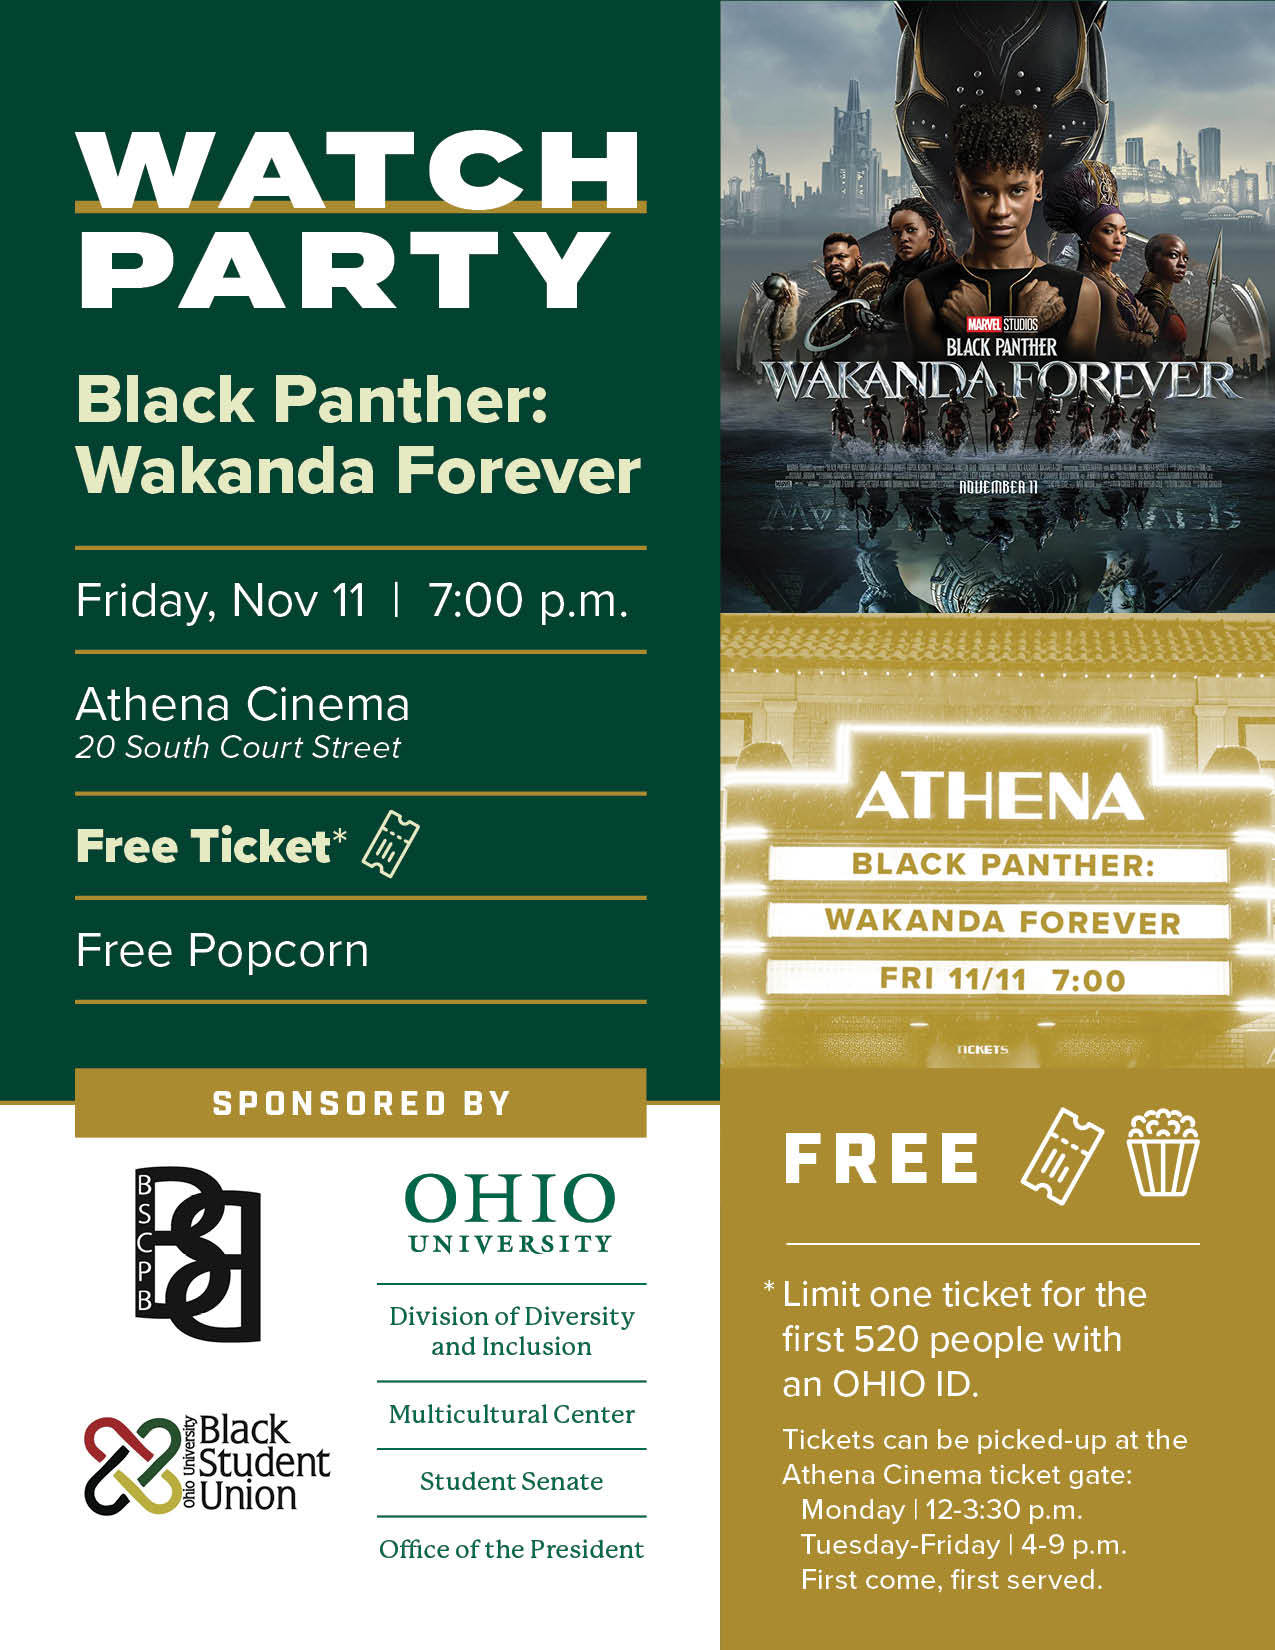 Flyer for "Black Panther: Wakanda Forever" movie screening at the Athena Cinema. 